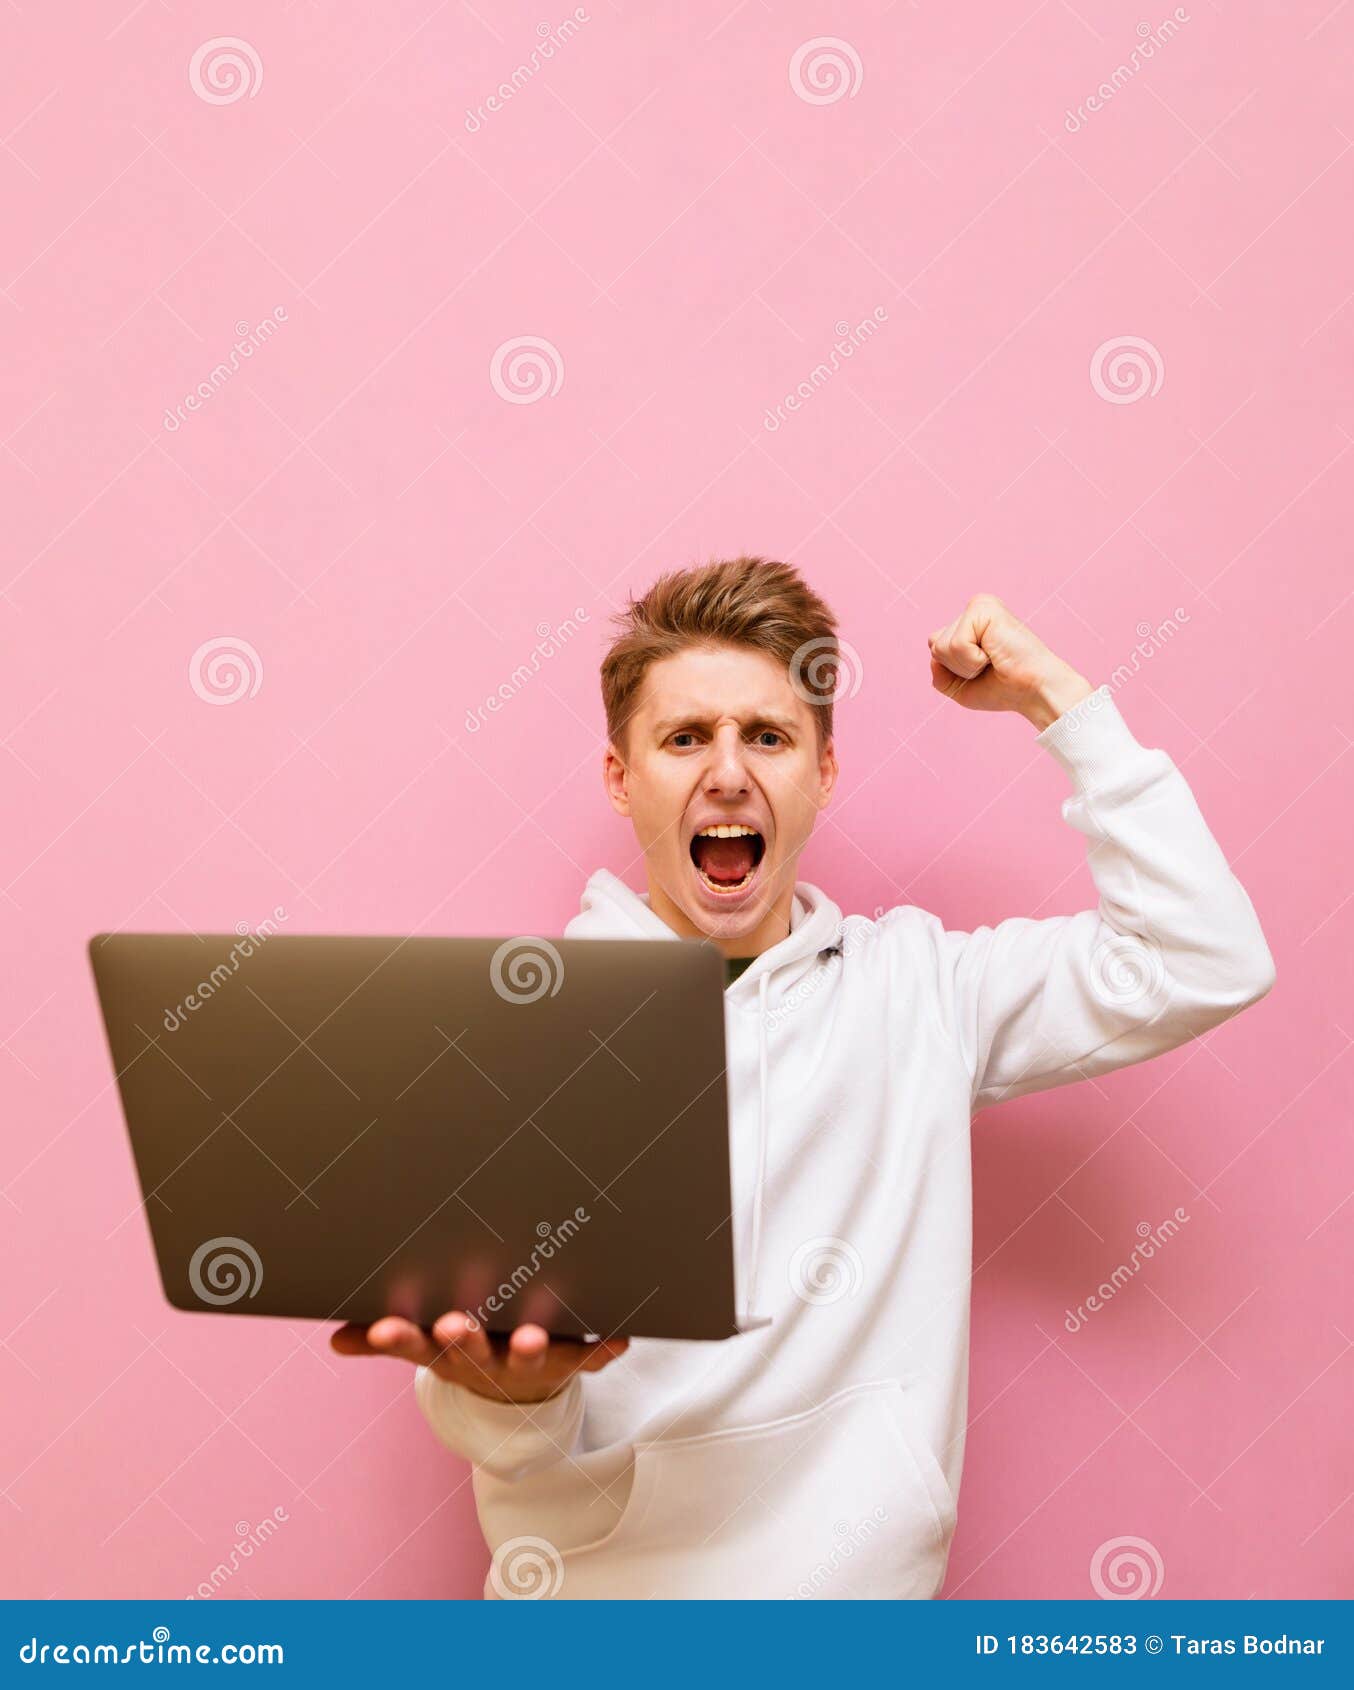 emotional guy rejoices in victory with a laptop in his hands, looks into the camera and shouts with joy, on pink